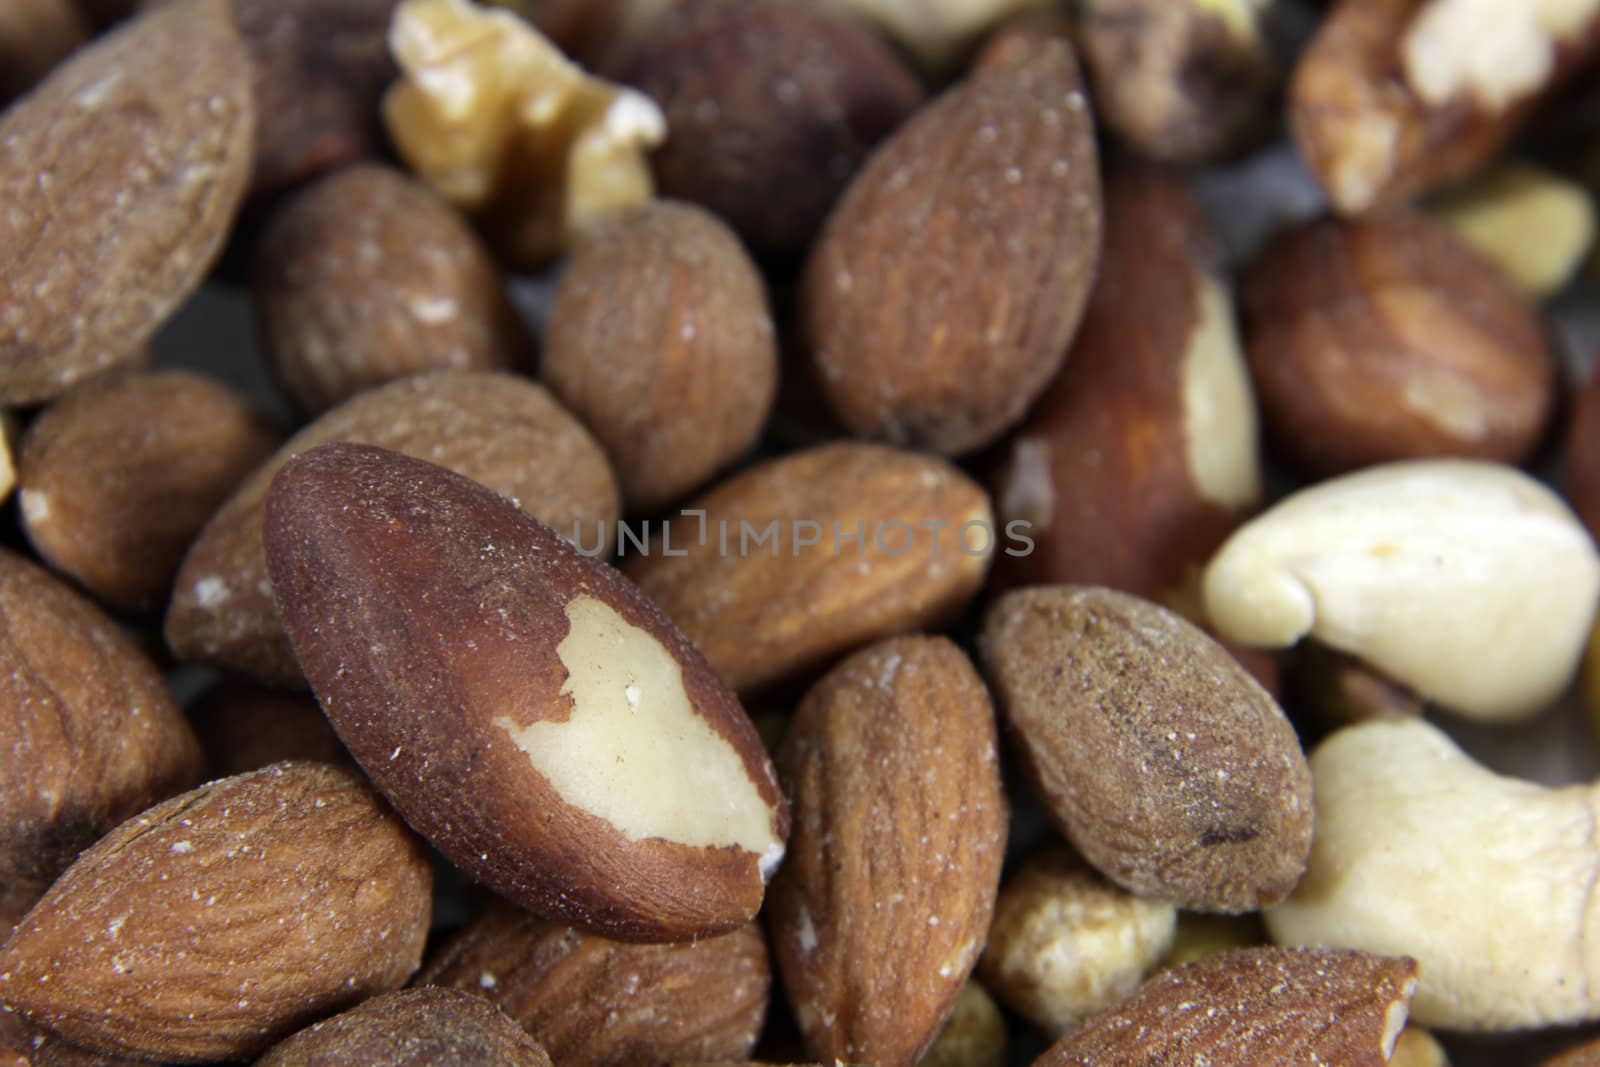 A close-up of mixed nuts, featuring walnuts, almonds, hazelnuts, and brazil nuts.
